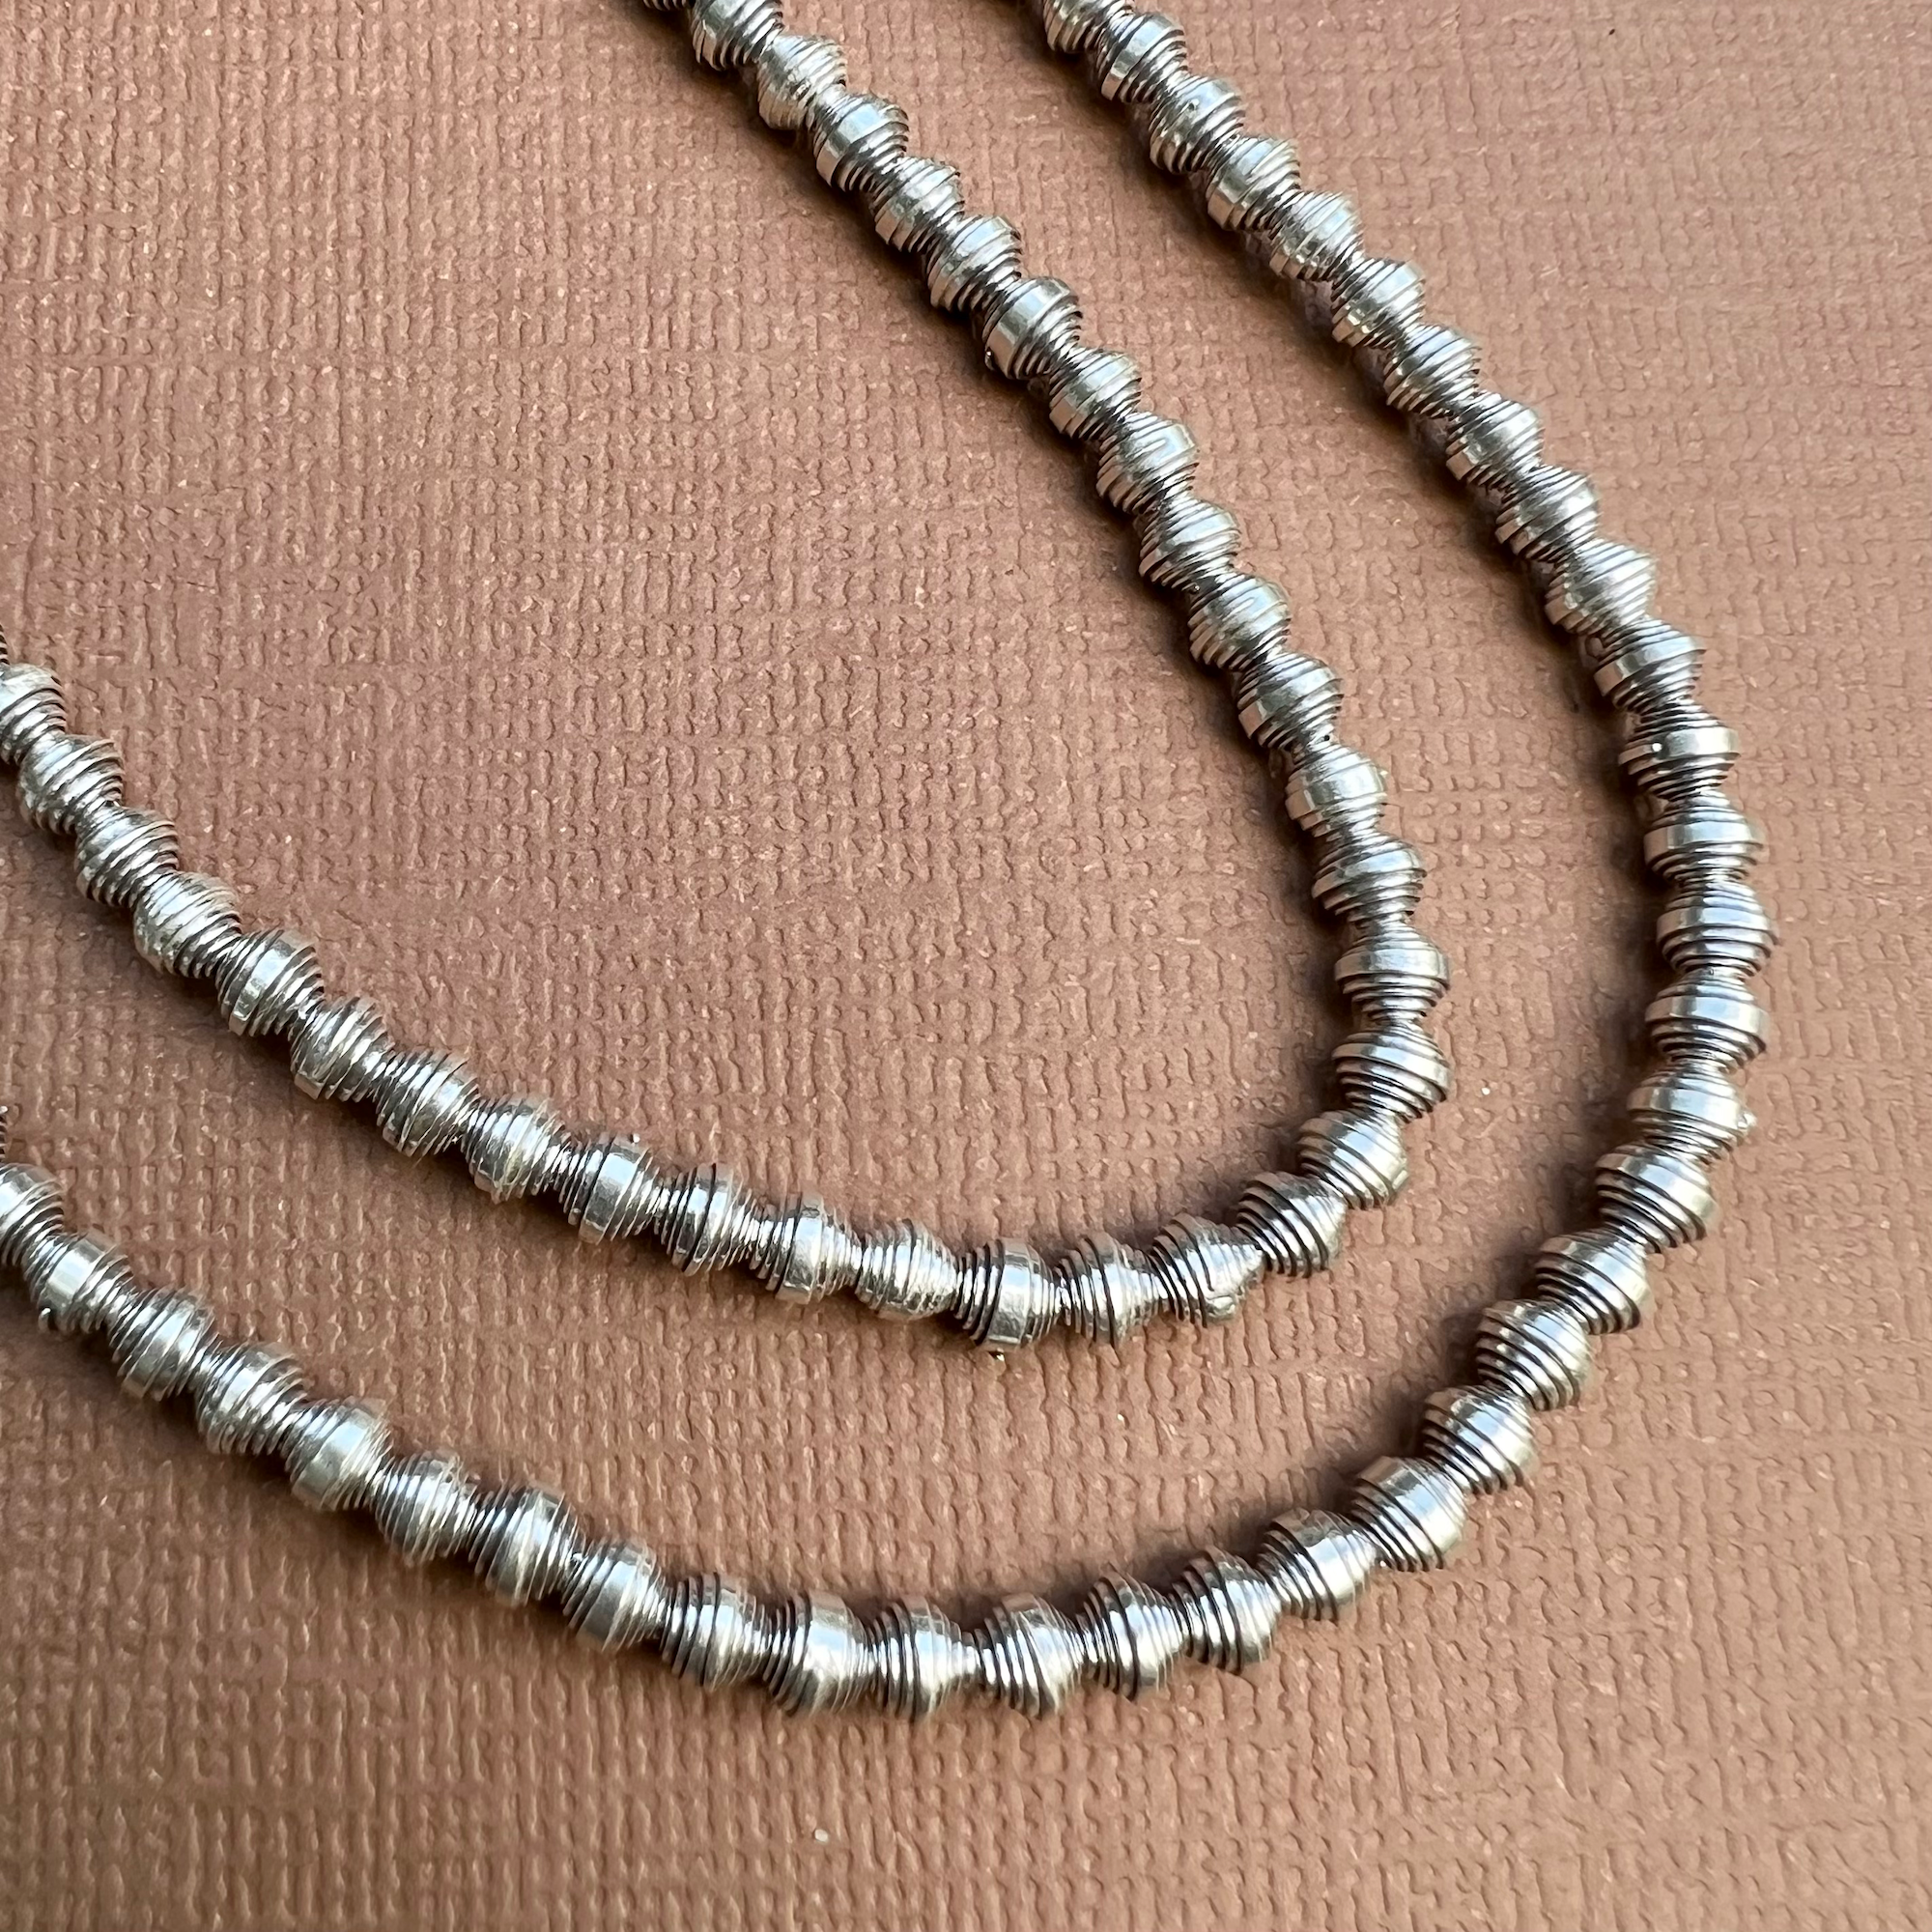 Hill Tribe Fine Silver Spiral Beads